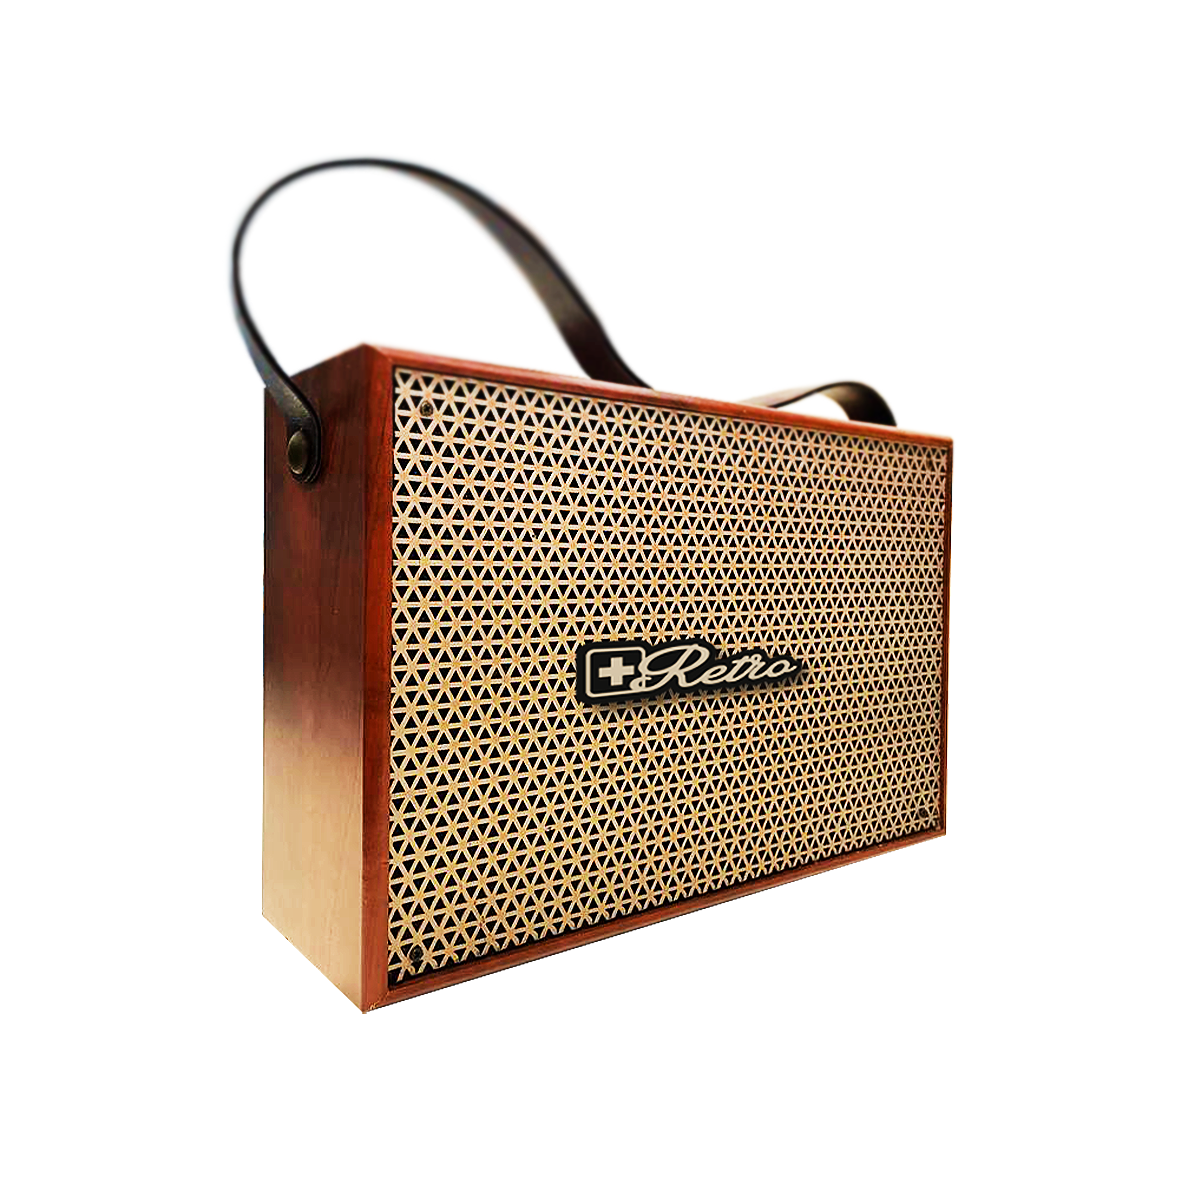 RETRO CLASSIC WIRELESS BLUETOOTH SPEAKER: A BLAST FROM THE PAST WITH MODERN FEATURES.